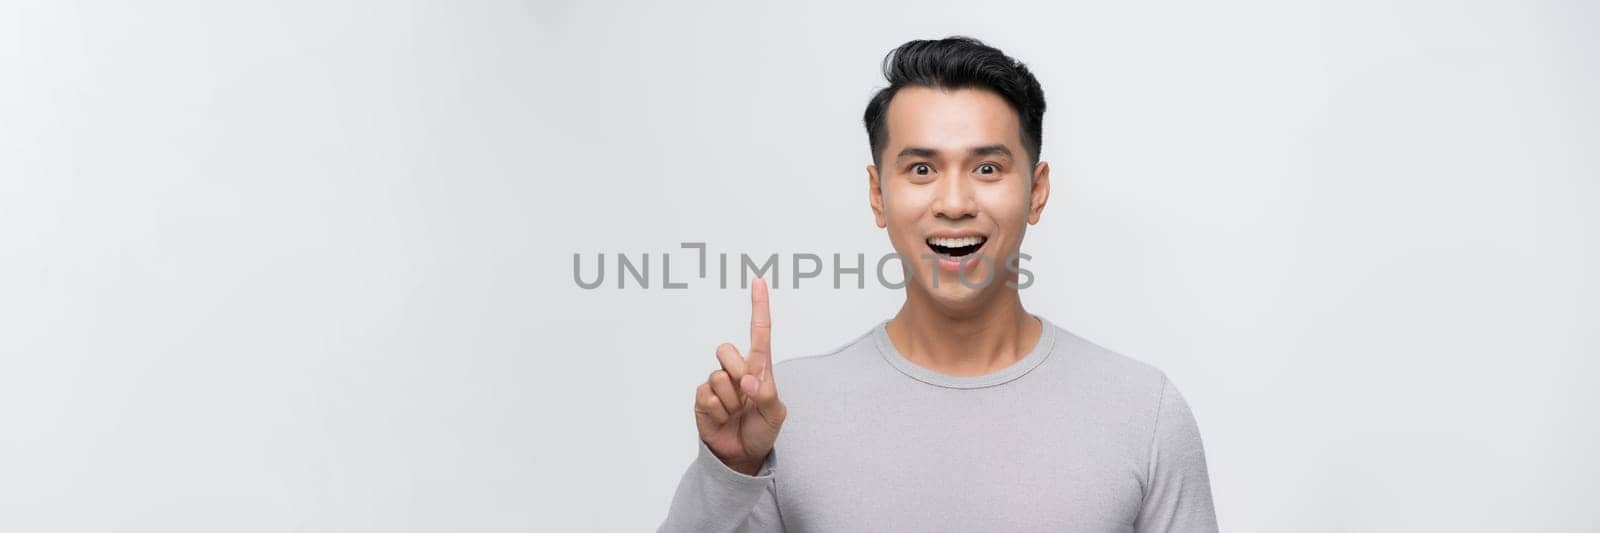 Attractive young man pointing up with his finger isolated on gray background